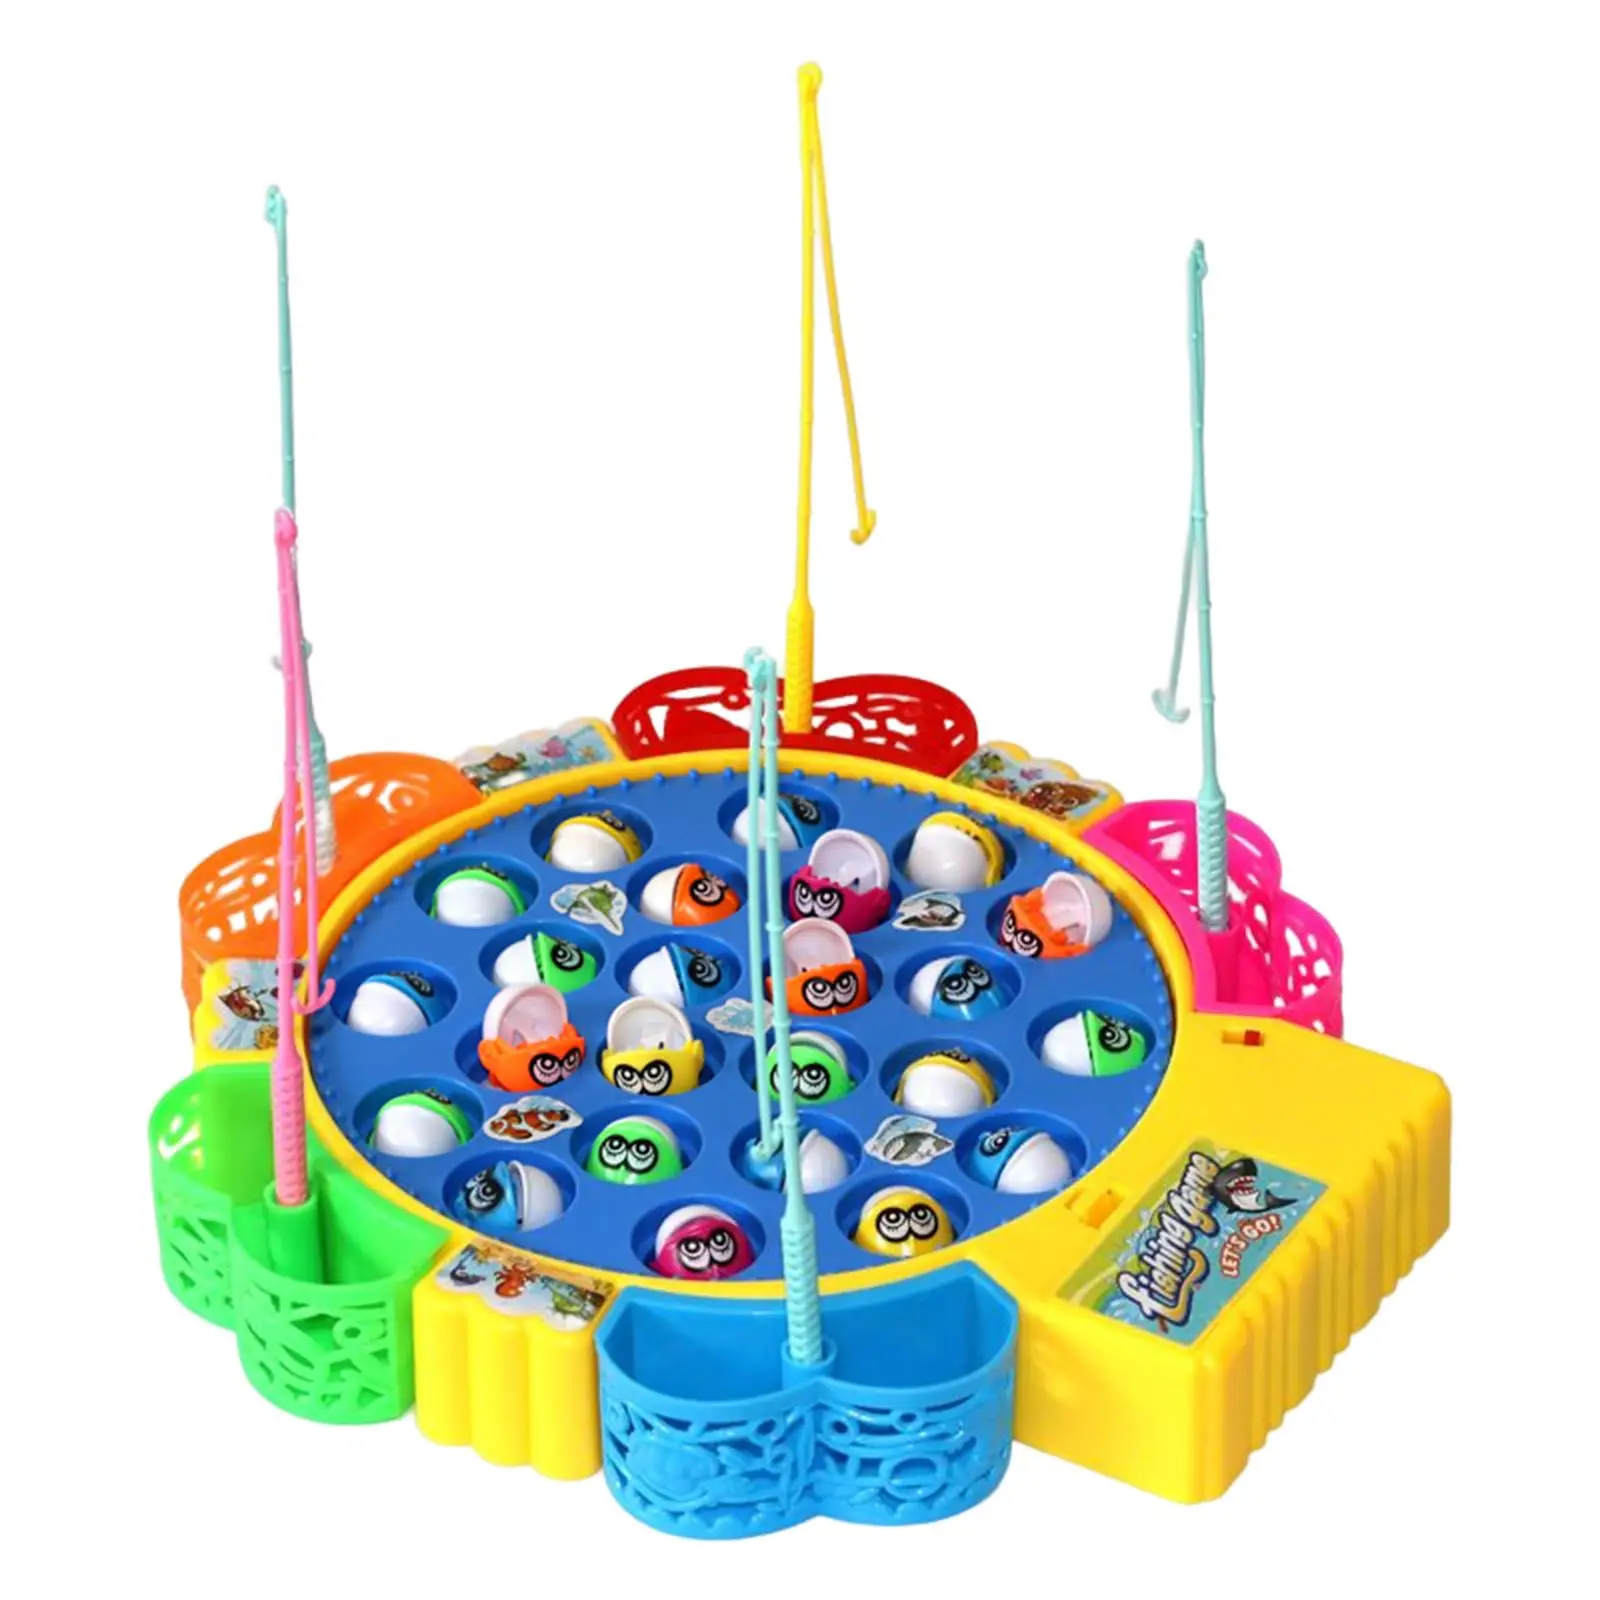 Montessori Rotating Fishing Game Kids Toy Ability Training Fine Motor skill, board Game for Ages 3+ Educational Toy Preschool